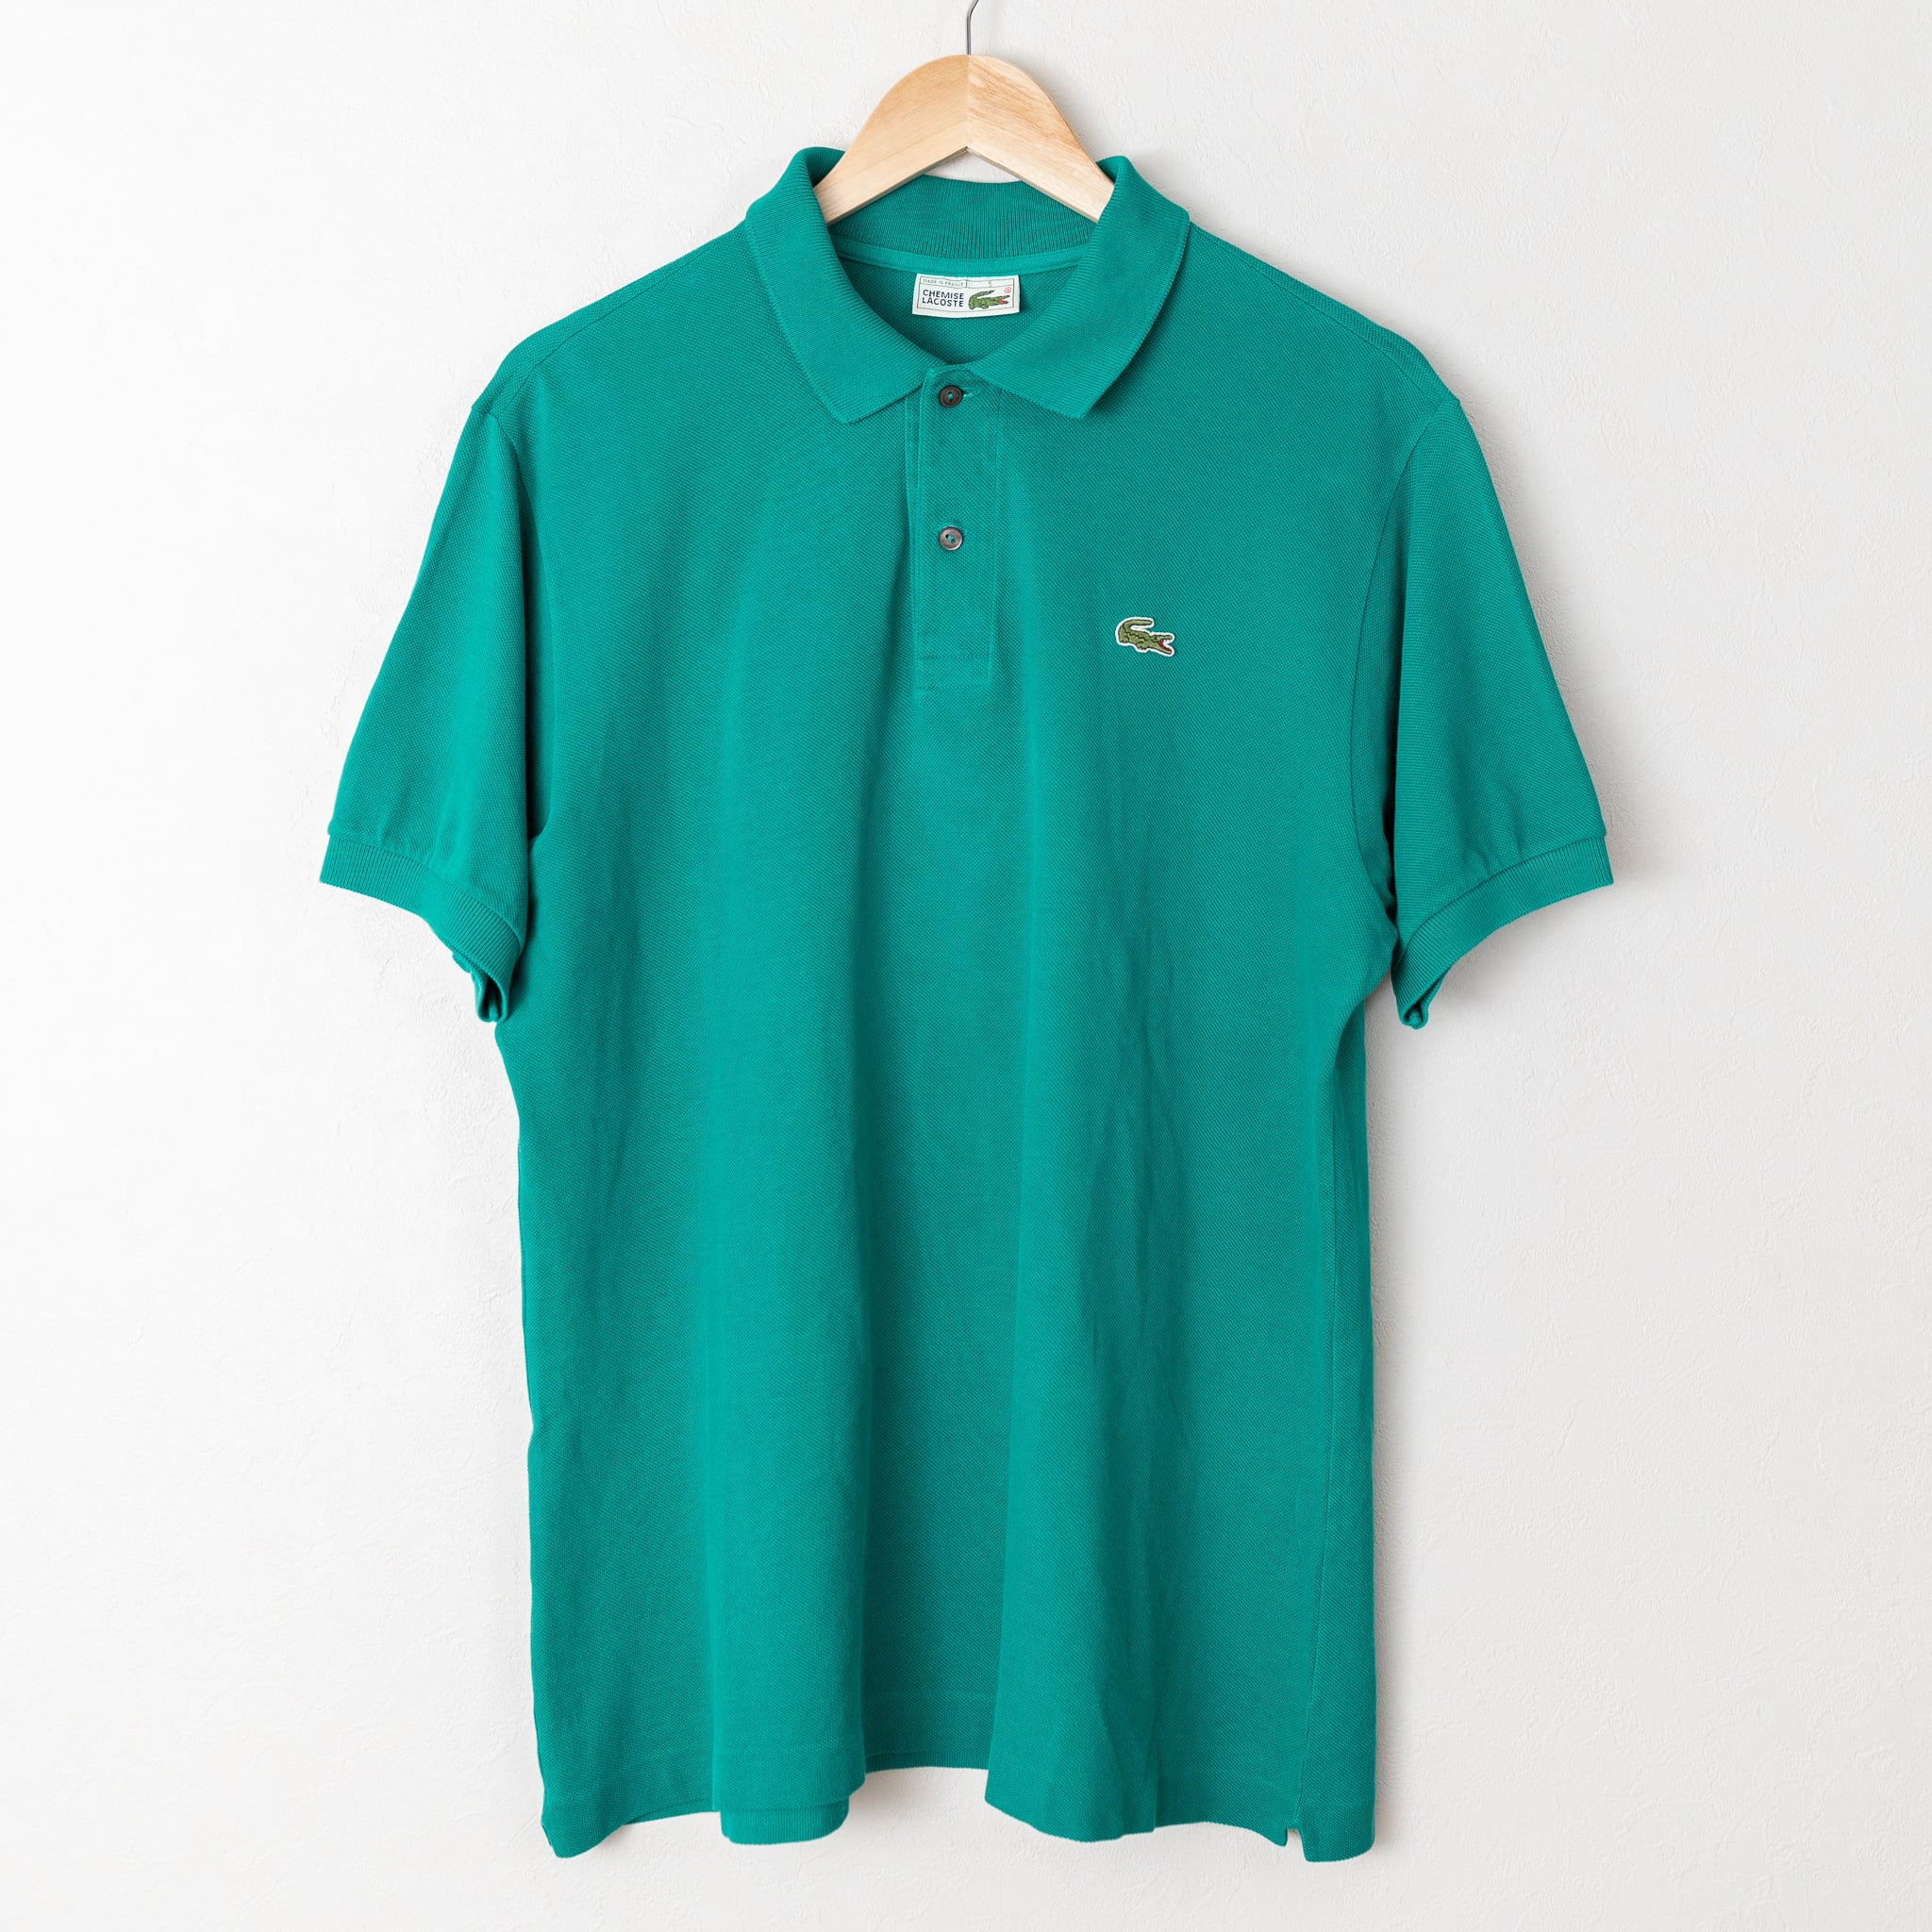 Formen indre tidligere 1970-80s】CHEMISE LACOSTE Polo Shirts Made in France フレンチラコステ ポロシャツ FL3 |  FAR EAST SIGNAL